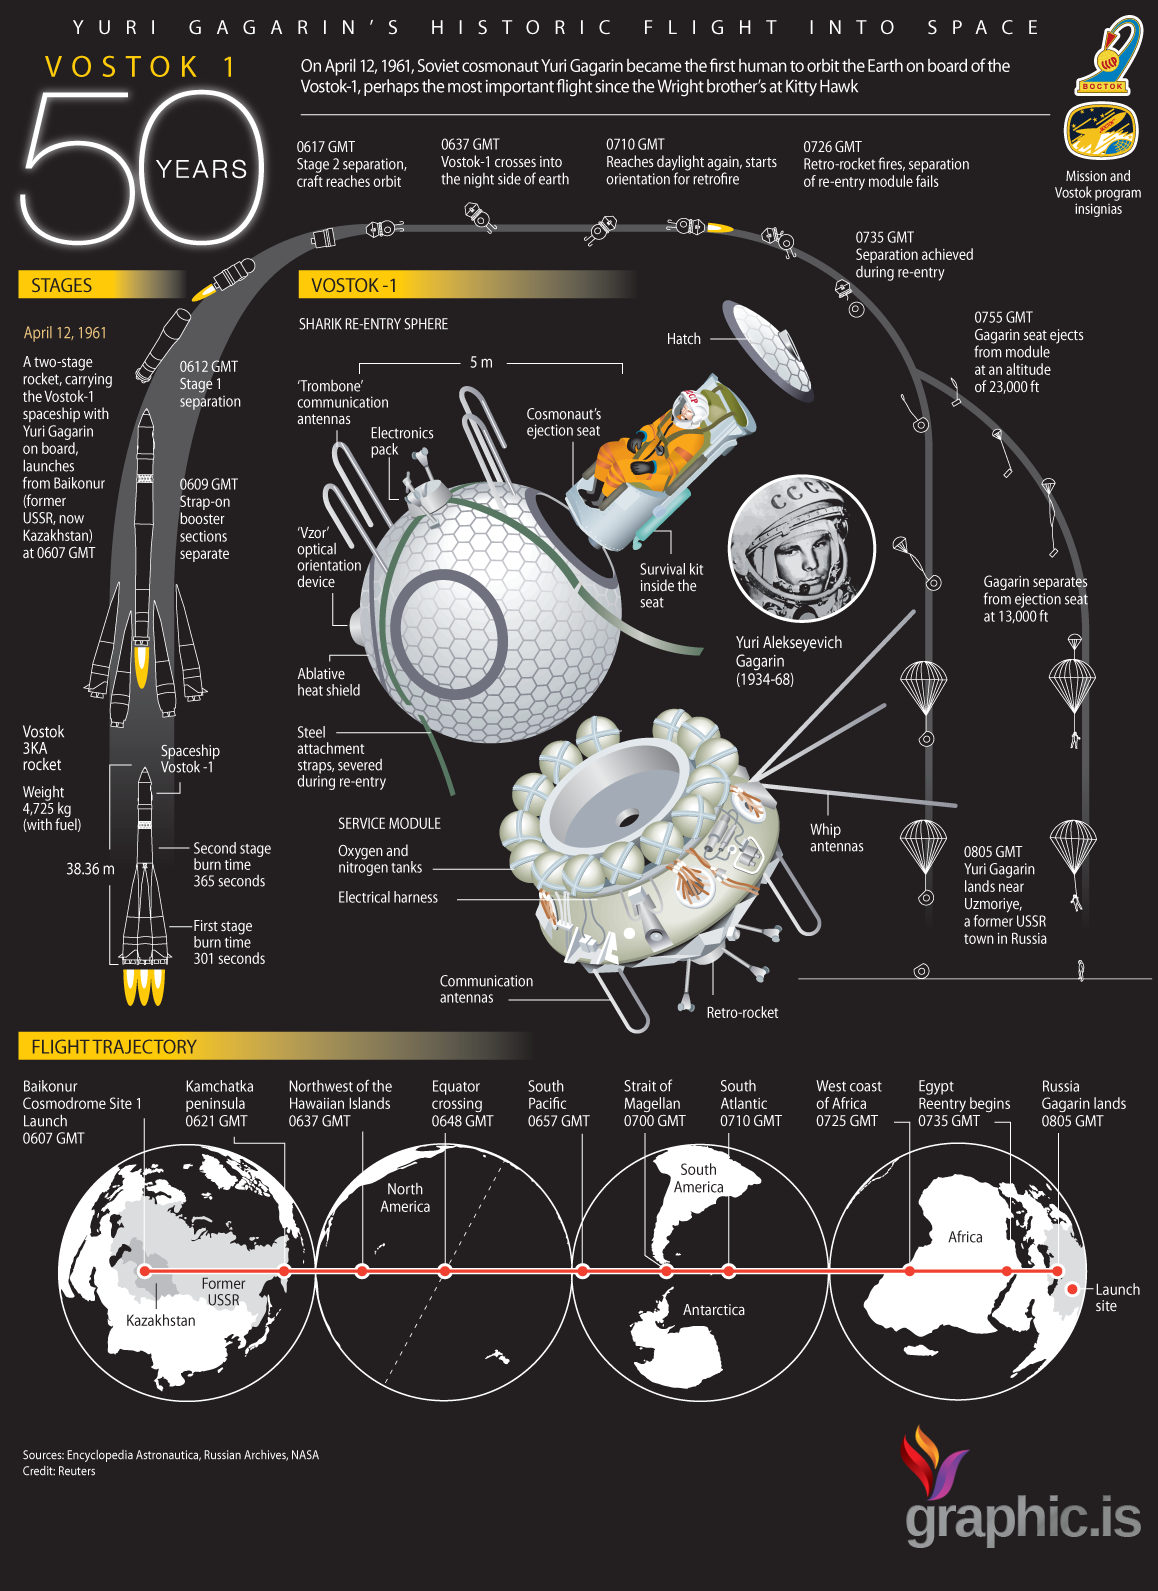 Vostok 1 (Russian: Восток-1, East 1 or Arrange 1) was the first spaceflight in the Vostok system and the first human spaceflight in history. The Vostok 3KA space apparatus was […]